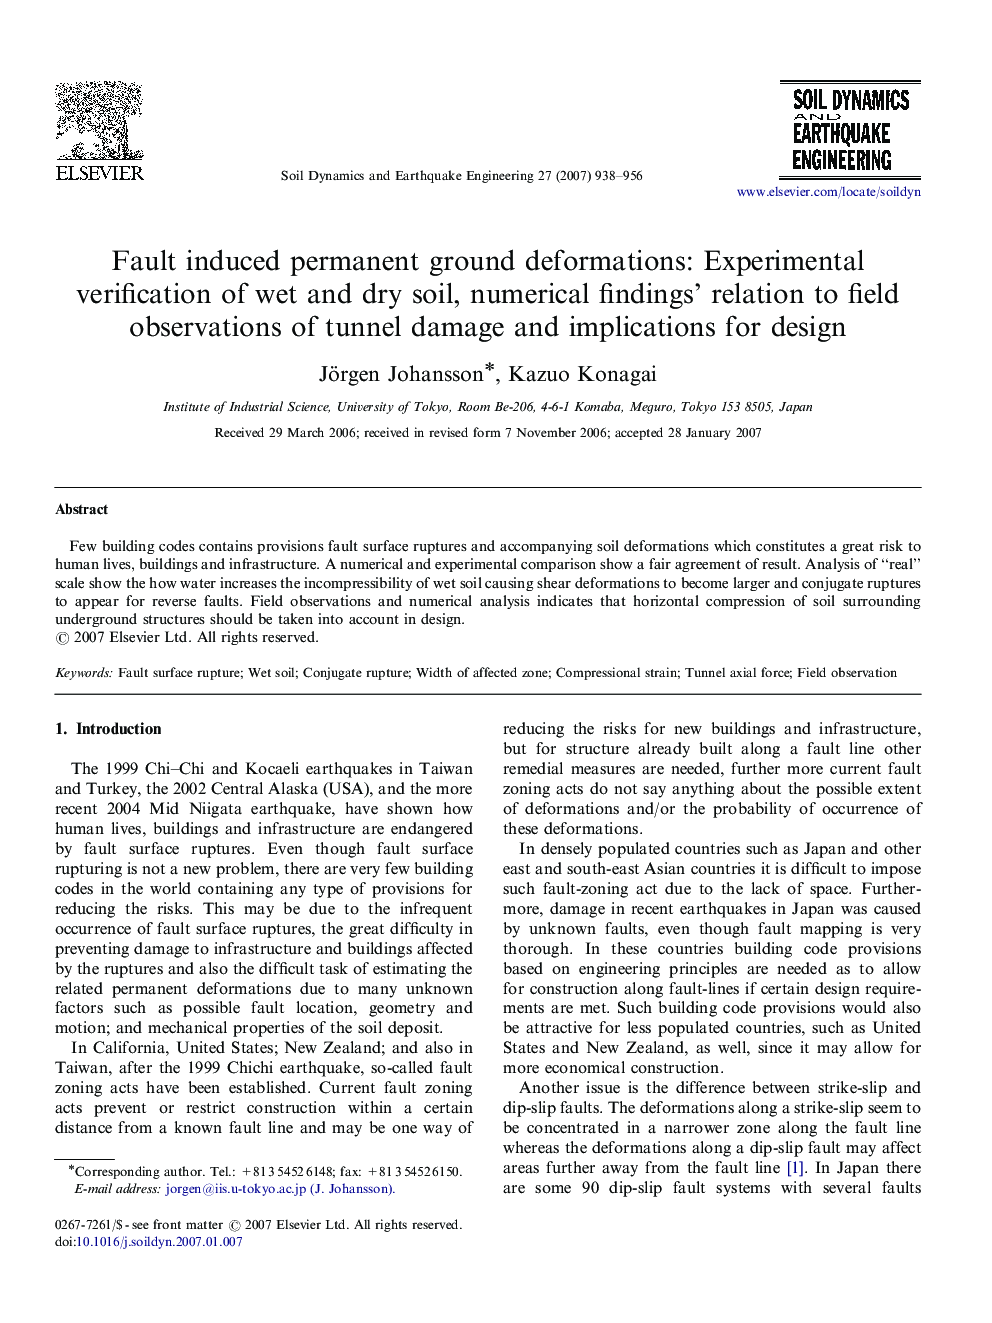 Fault induced permanent ground deformations: Experimental verification of wet and dry soil, numerical findings’ relation to field observations of tunnel damage and implications for design